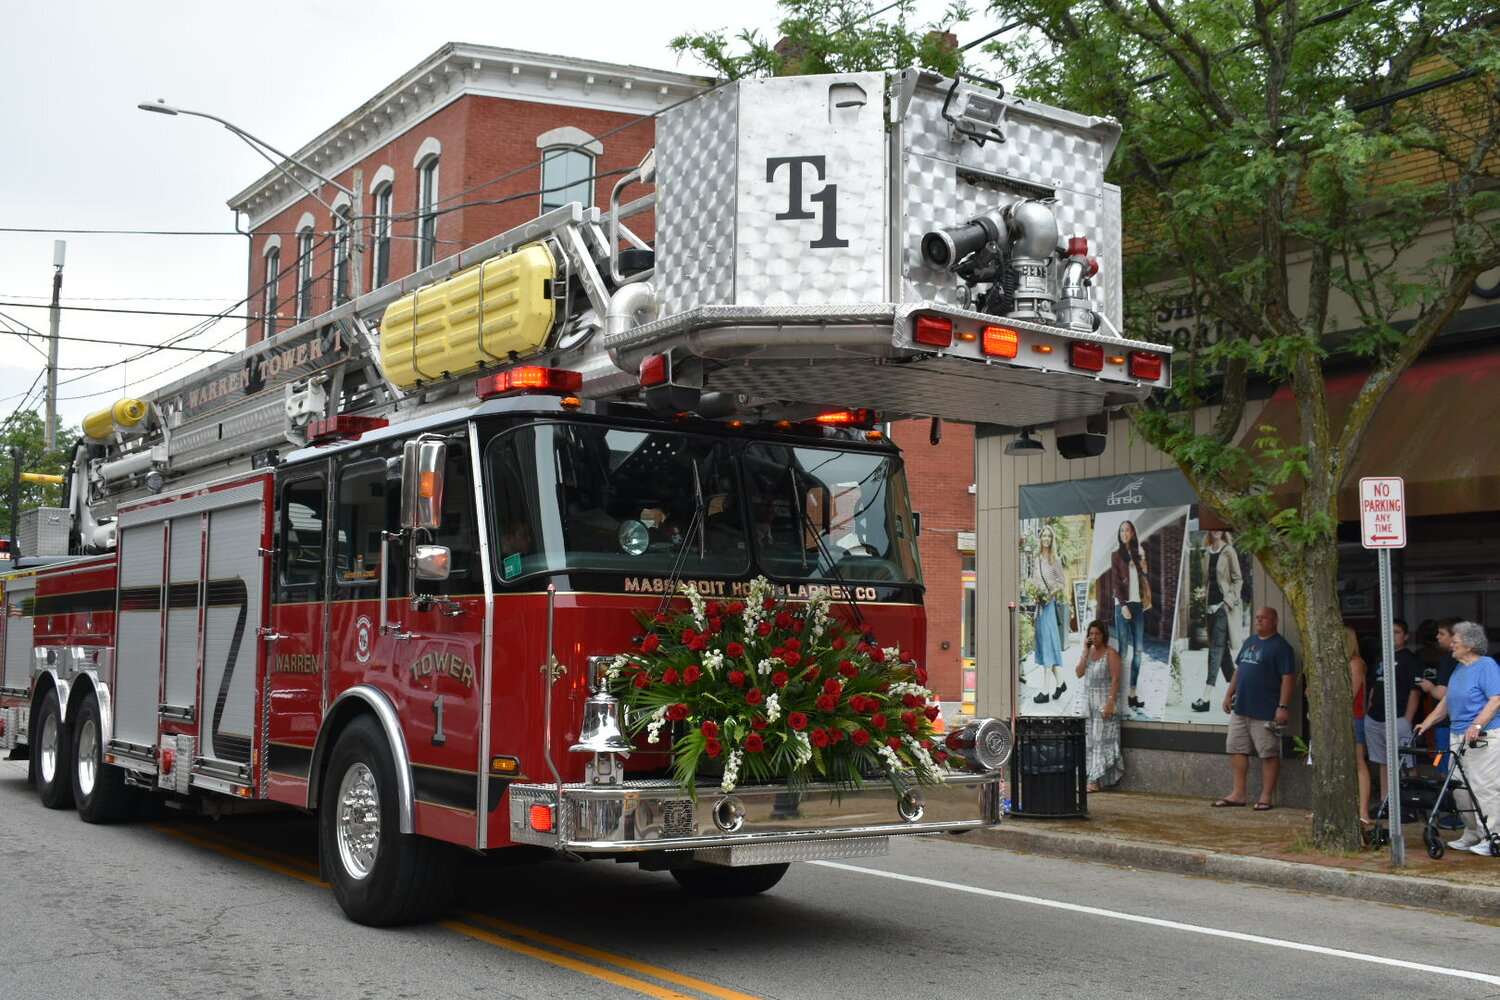 Warren Tower 1 travels north on Main Street during last year’s parade.